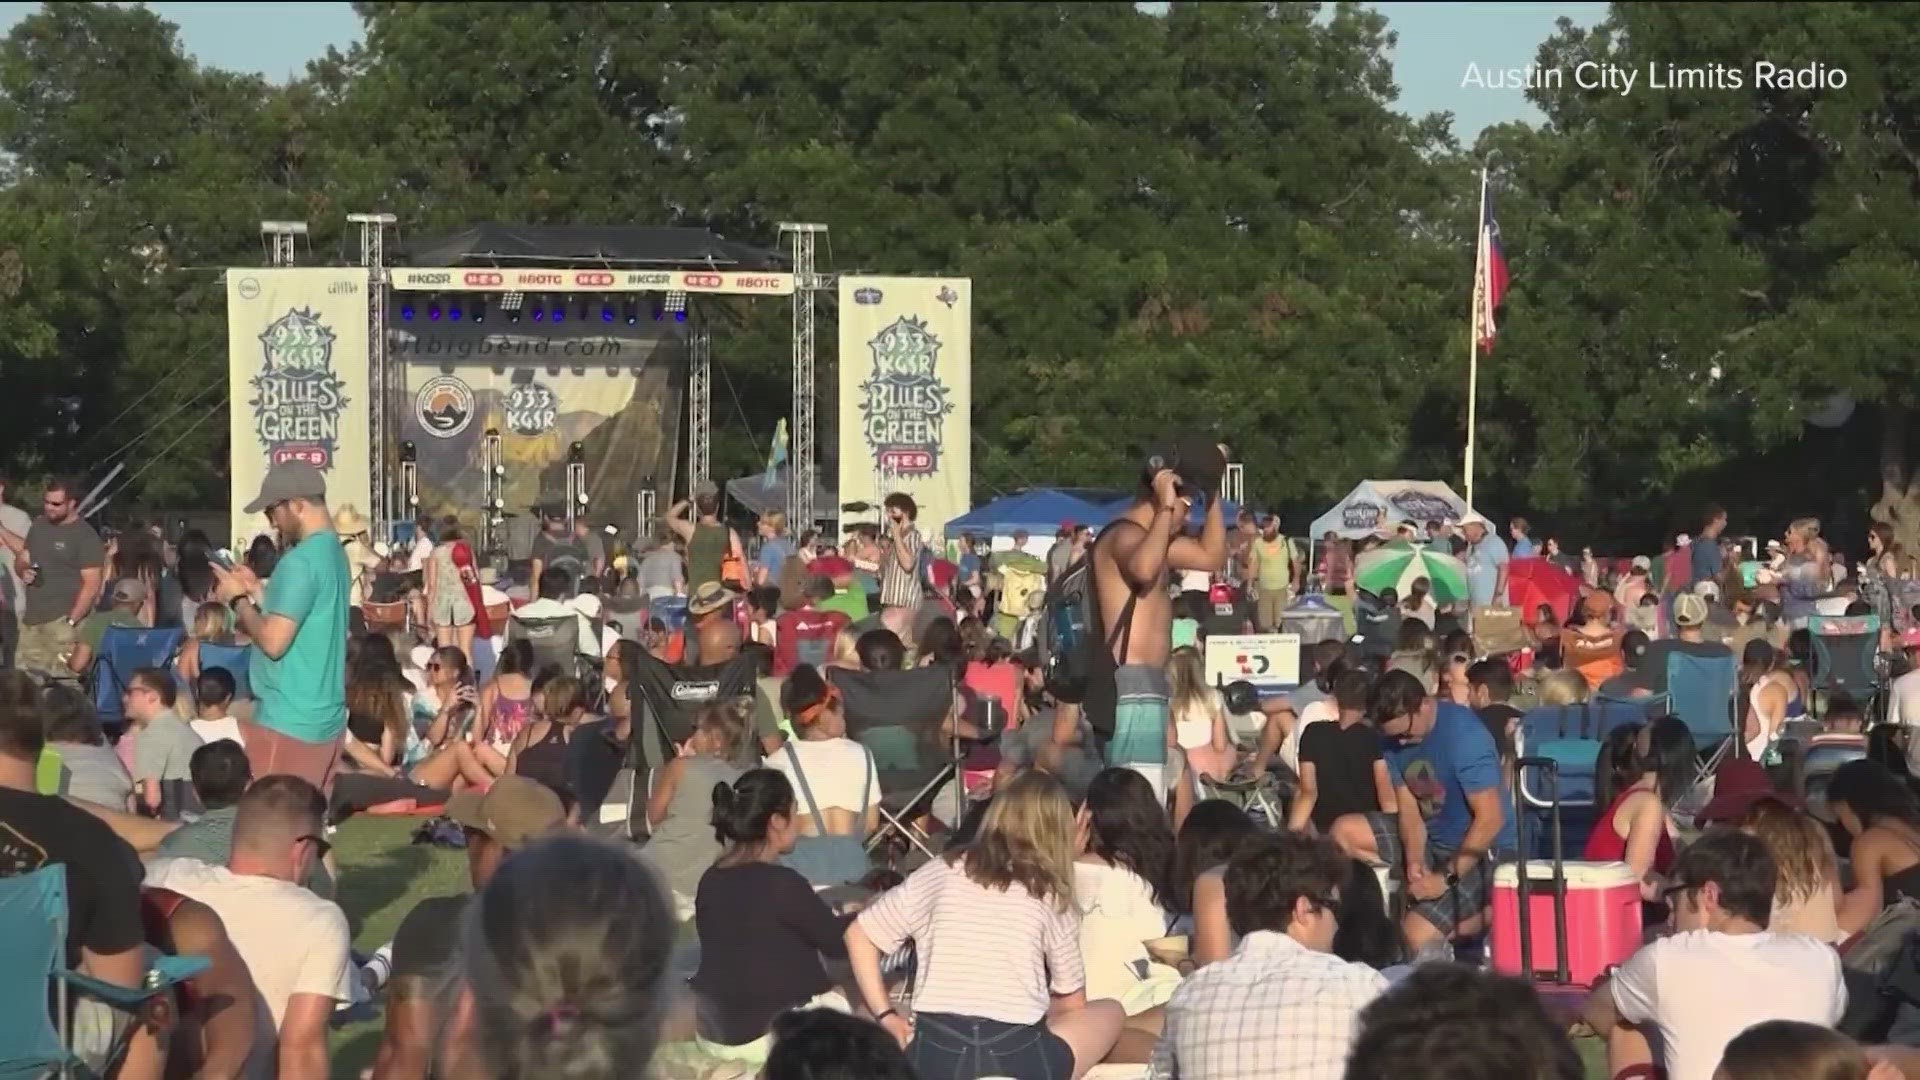 A resolution has been proposed for Austin City Council to consider in an effort to revive Blues on the Green. Organizers said costs forced them to cancel this year.